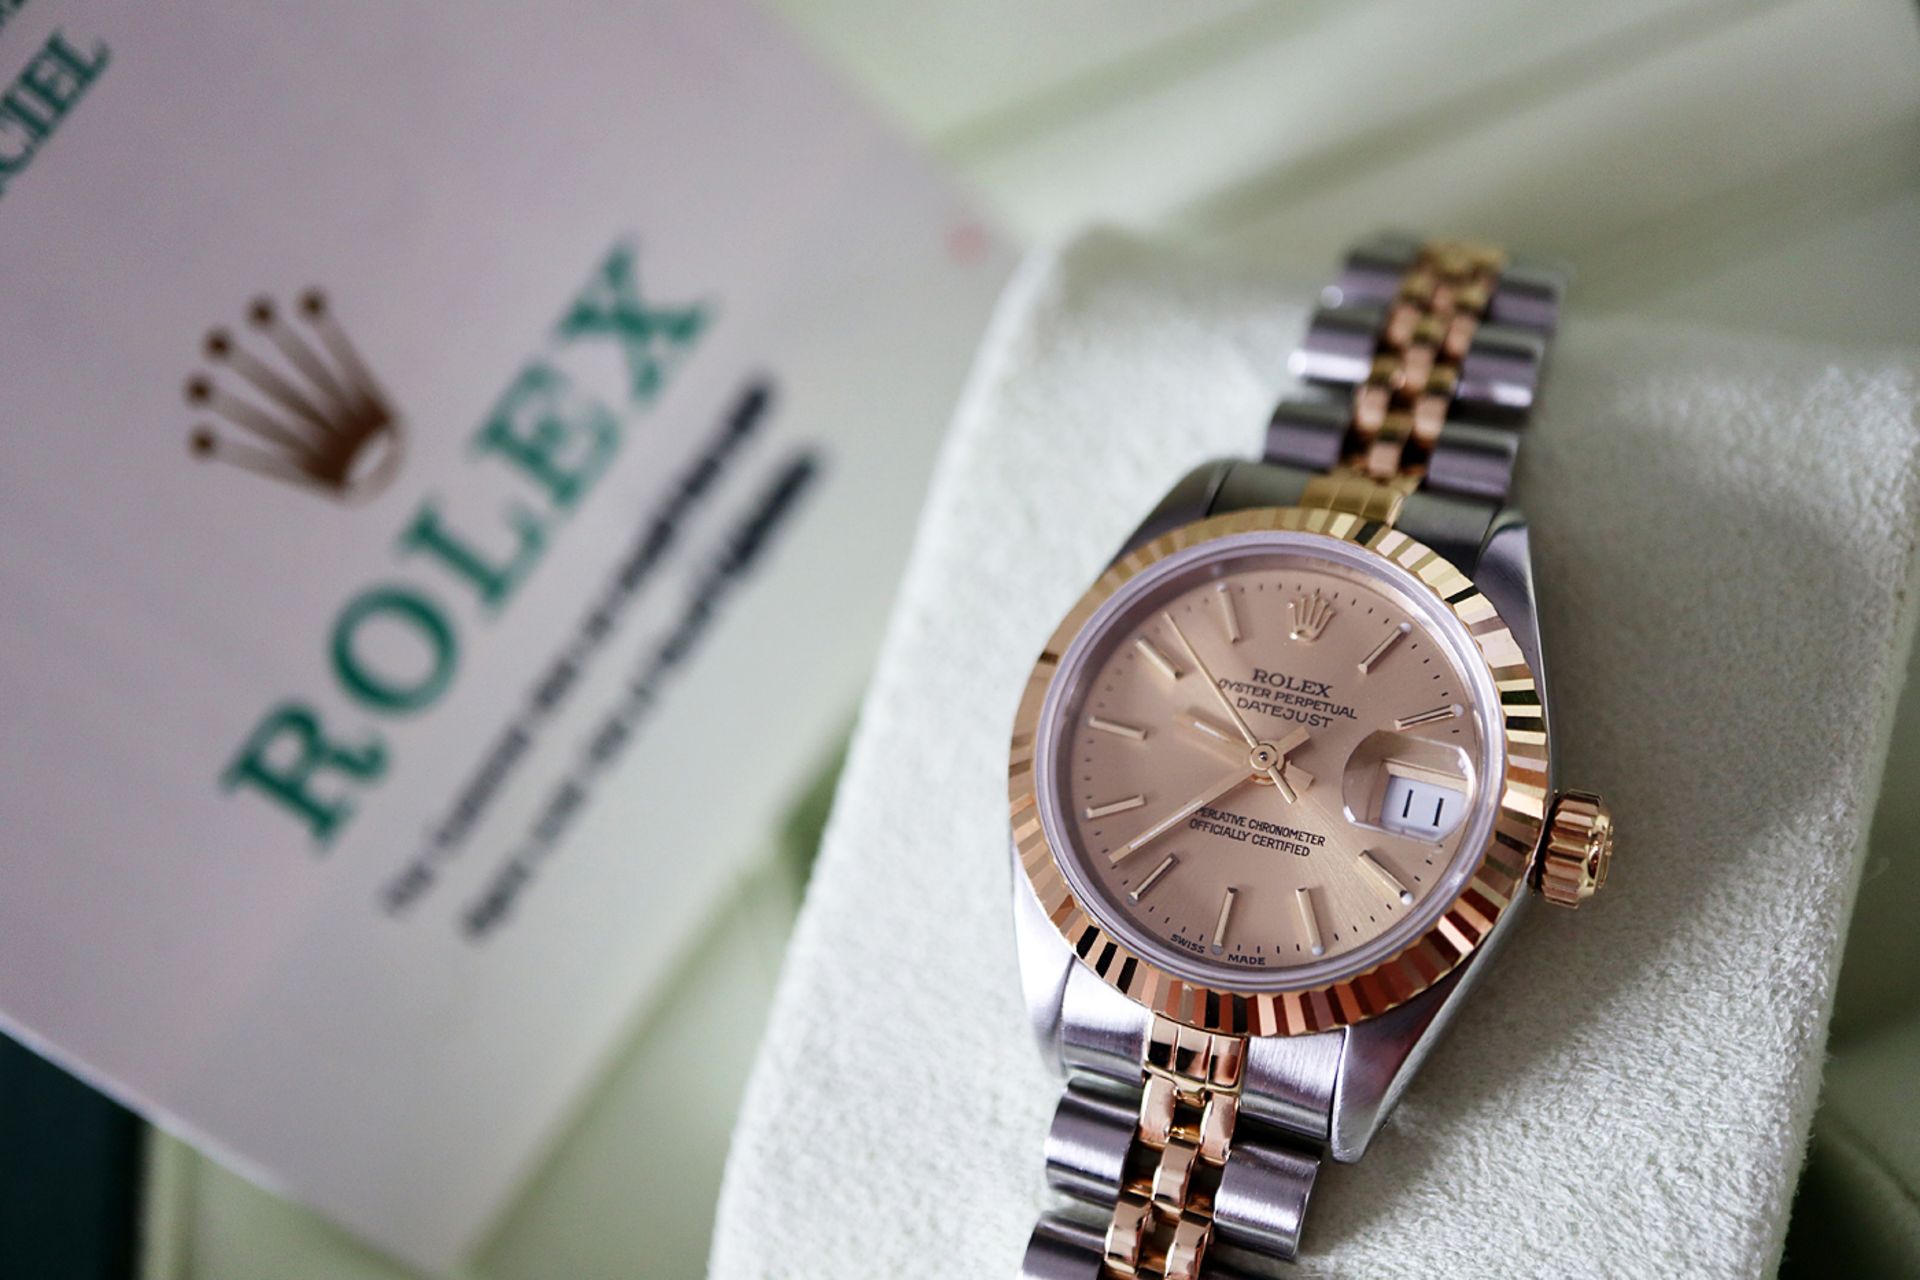 ROLEX DATEJUST 18K / STEEL REF. 69173 *CHAMPAGNE* - FULL SET WITH CERTIFICATE, BOX & TAGS ETC - Image 2 of 9